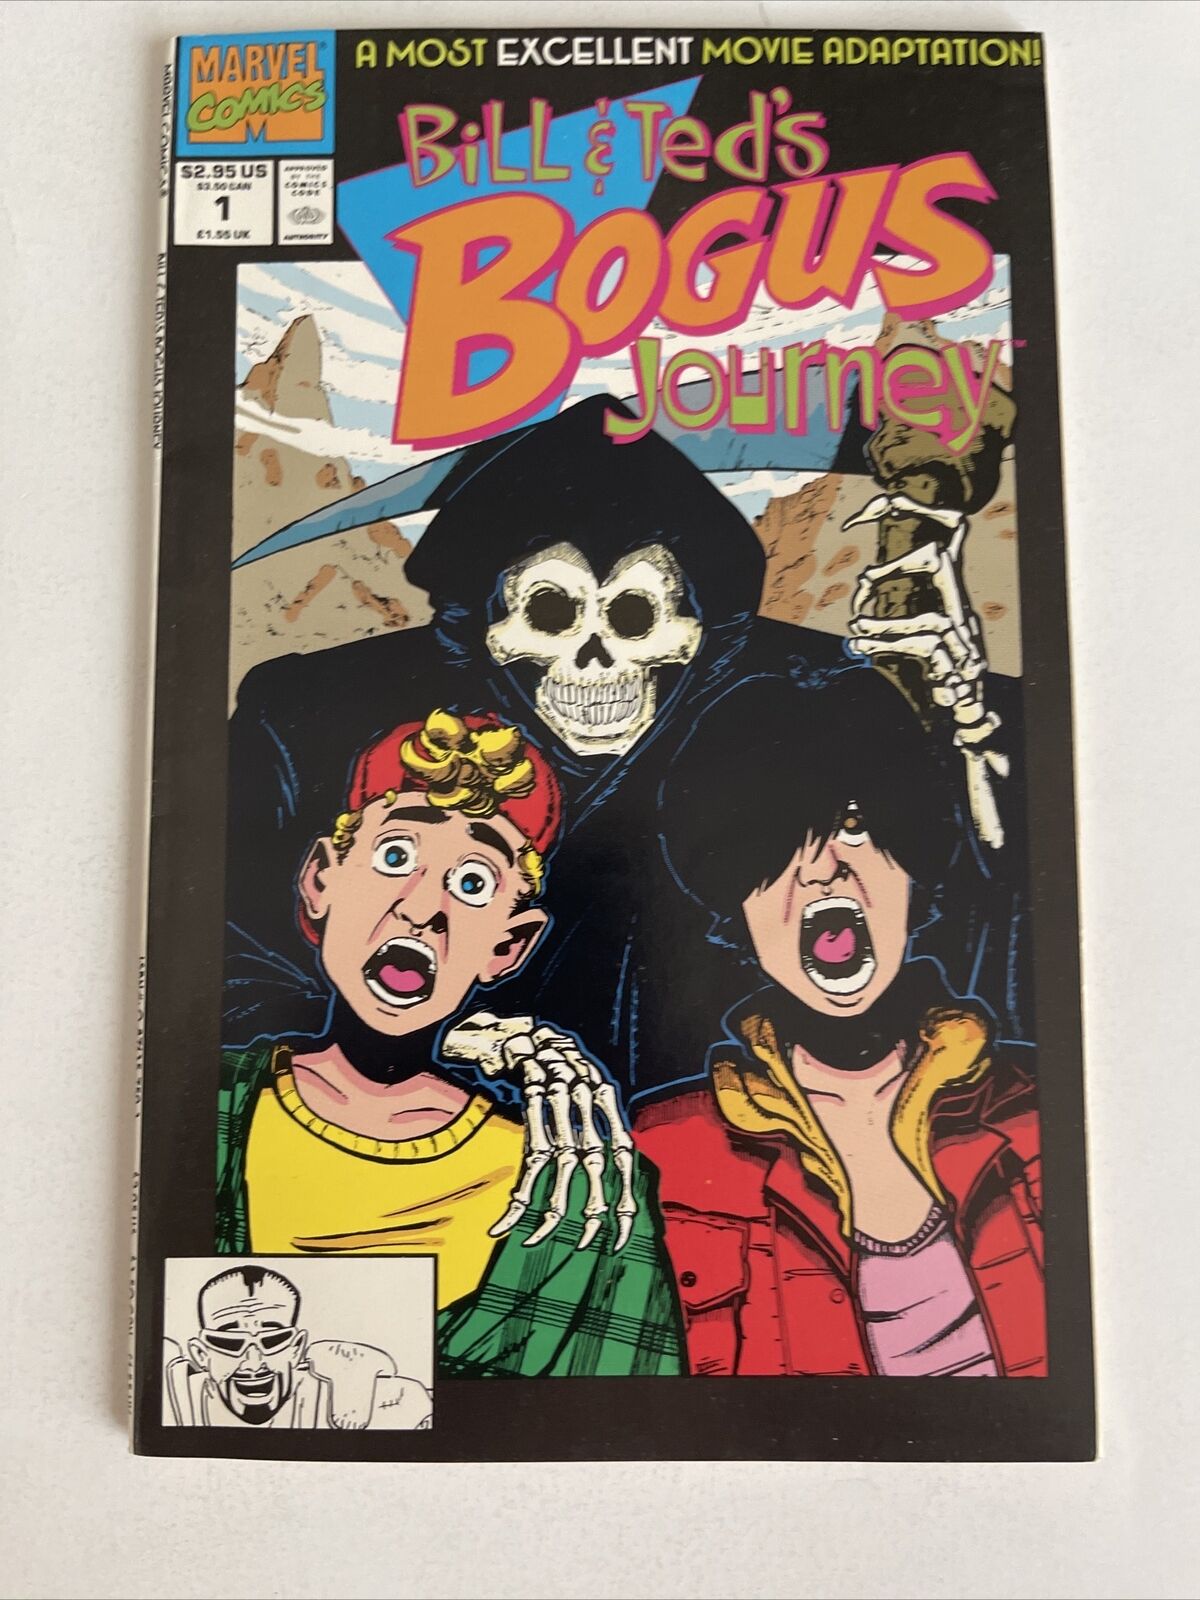 Bill and Ted's Bogus Journey #1 Marvel Comics